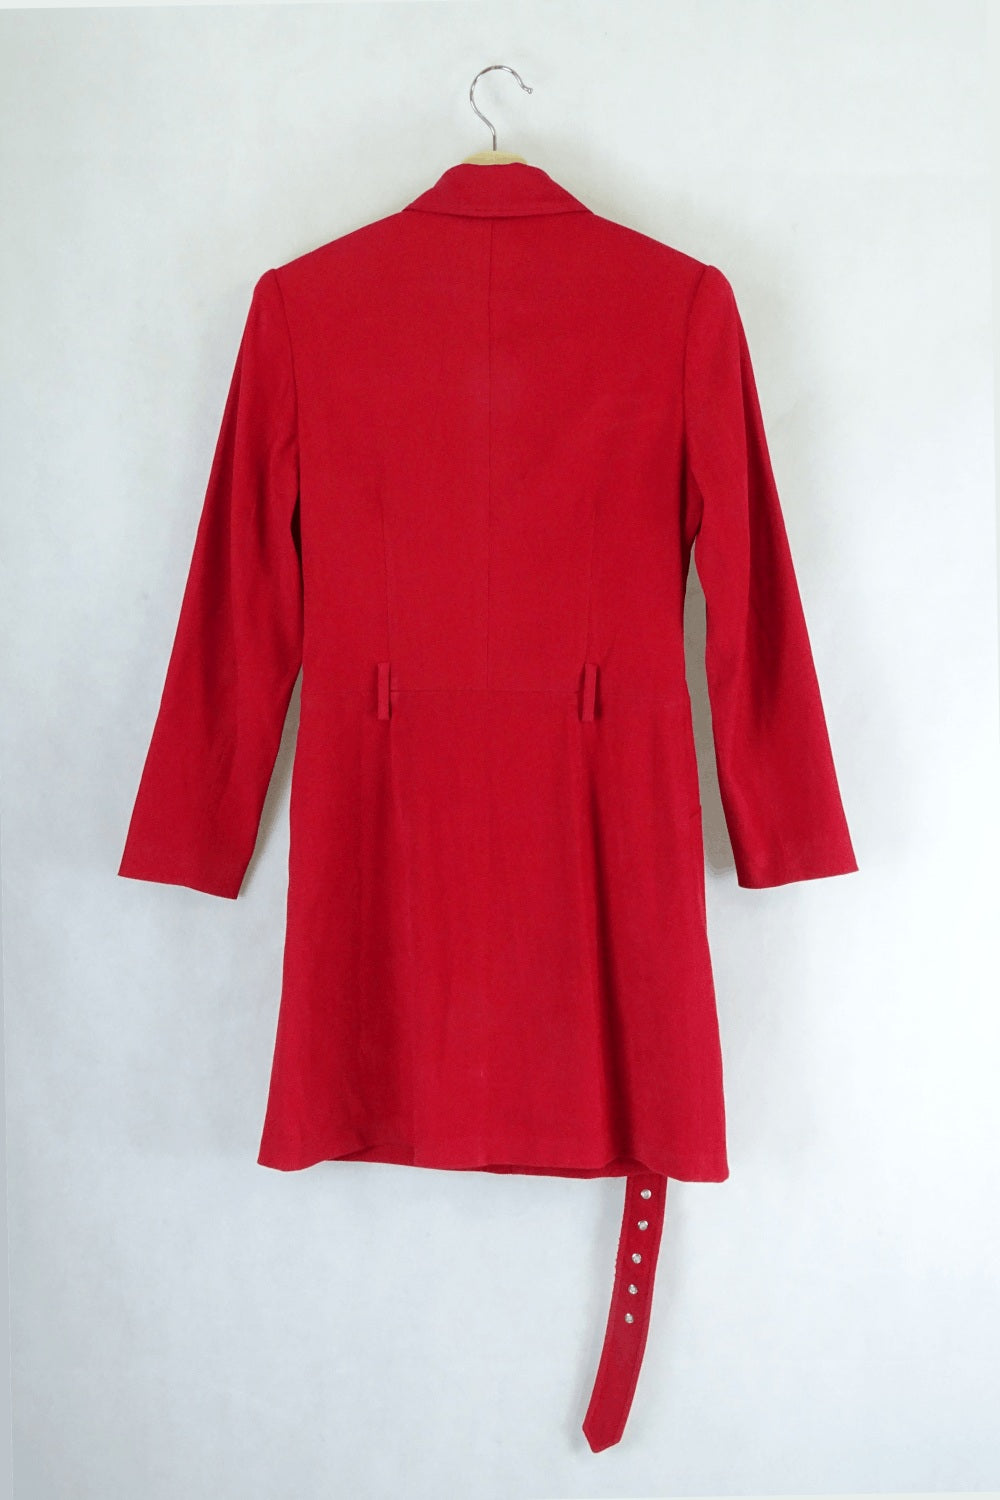 Wanko Collection Red Dress 34 ( AU 6)